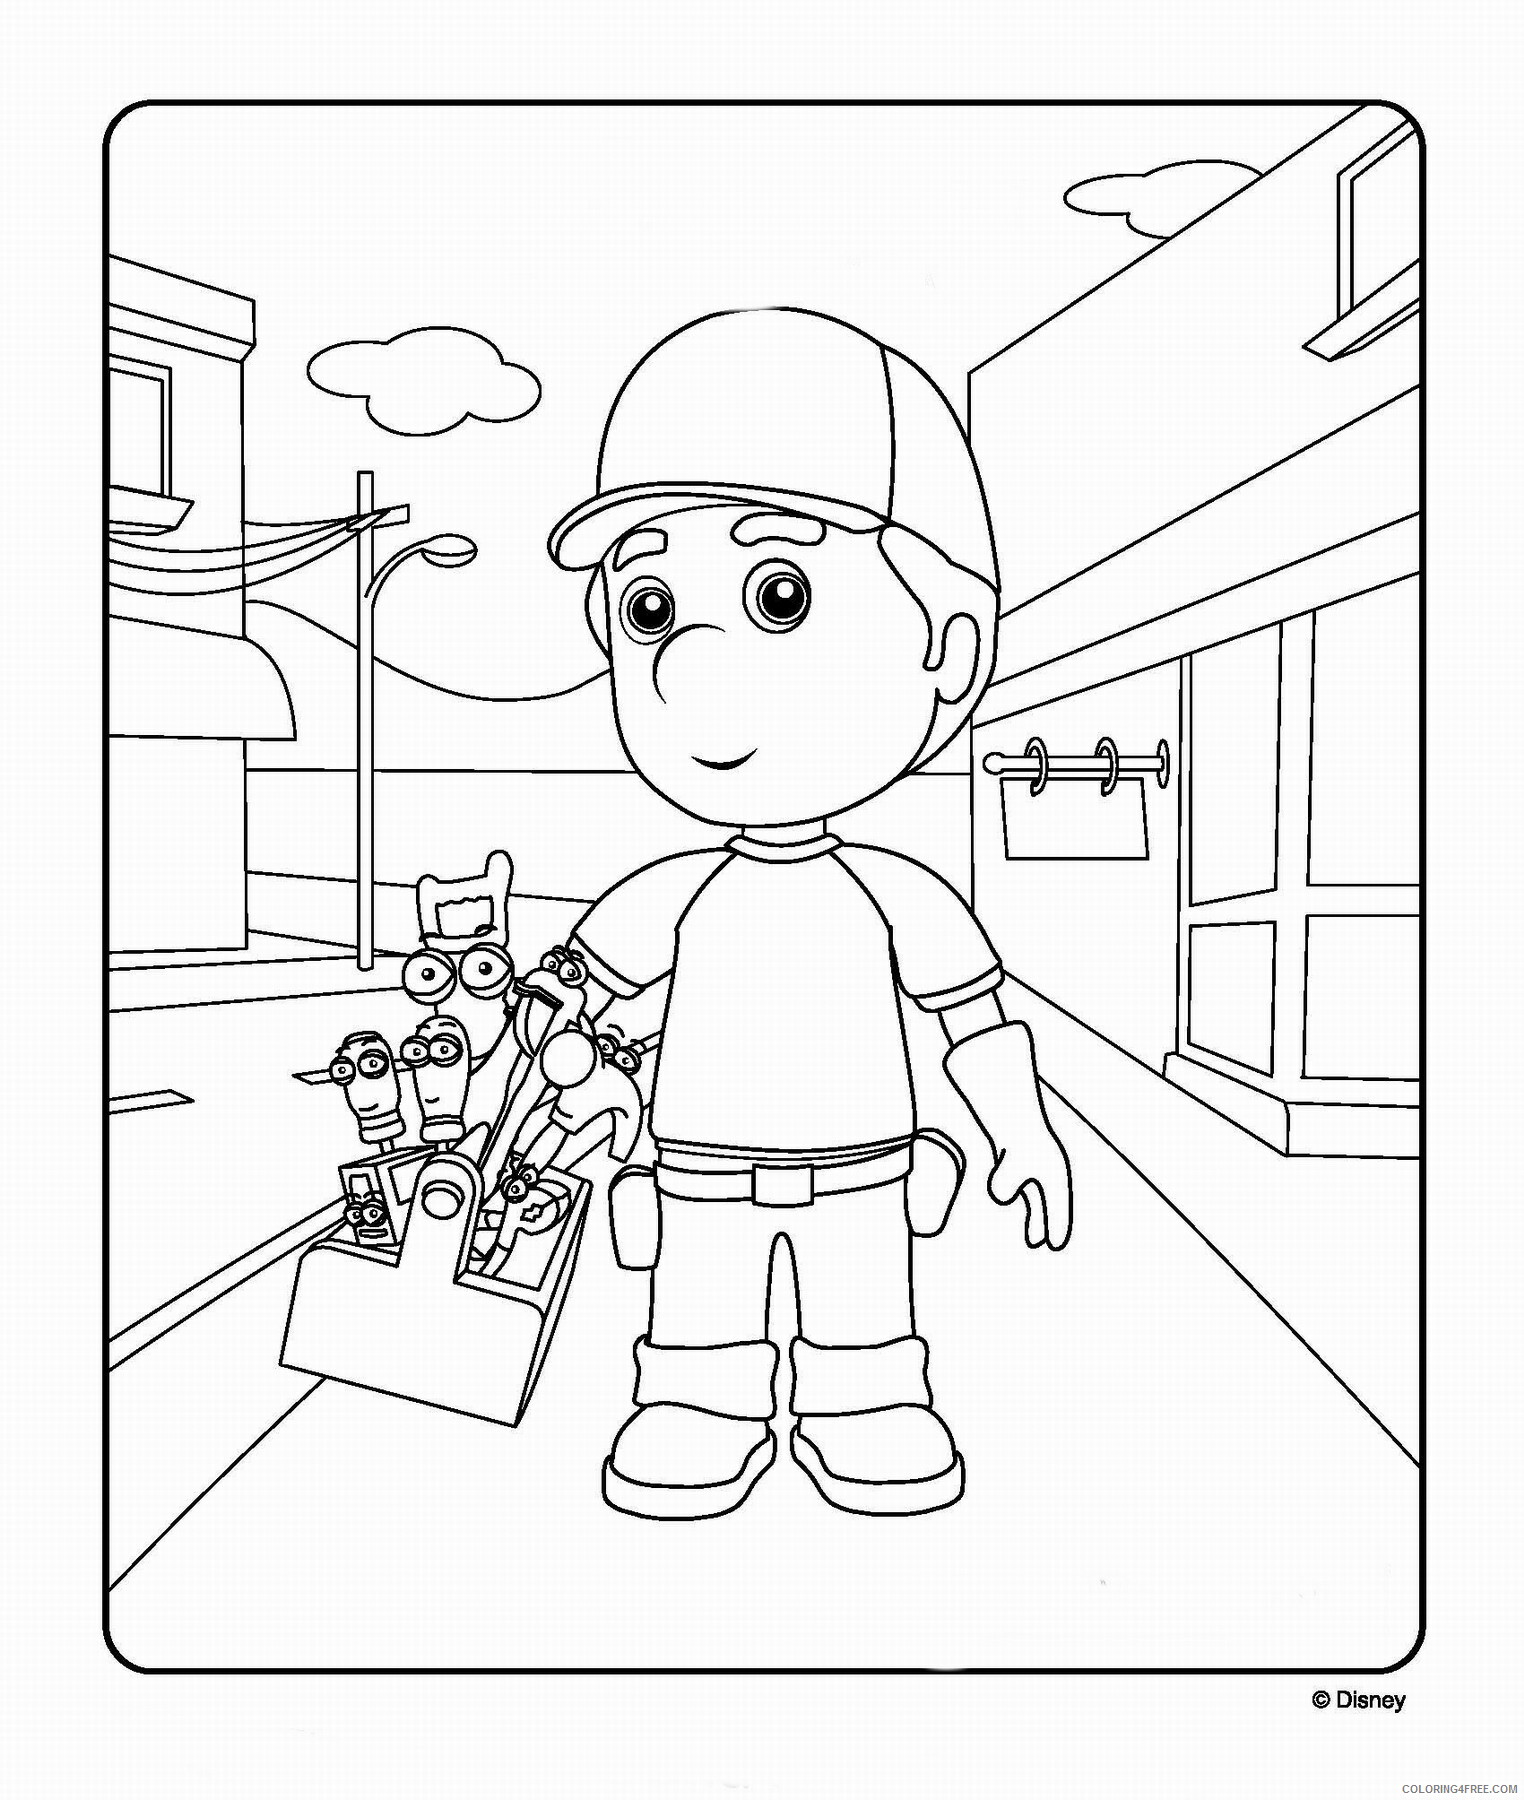 Bob the Builder Coloring Pages TV Film bob the builder_36 Printable 2020 00985 Coloring4free